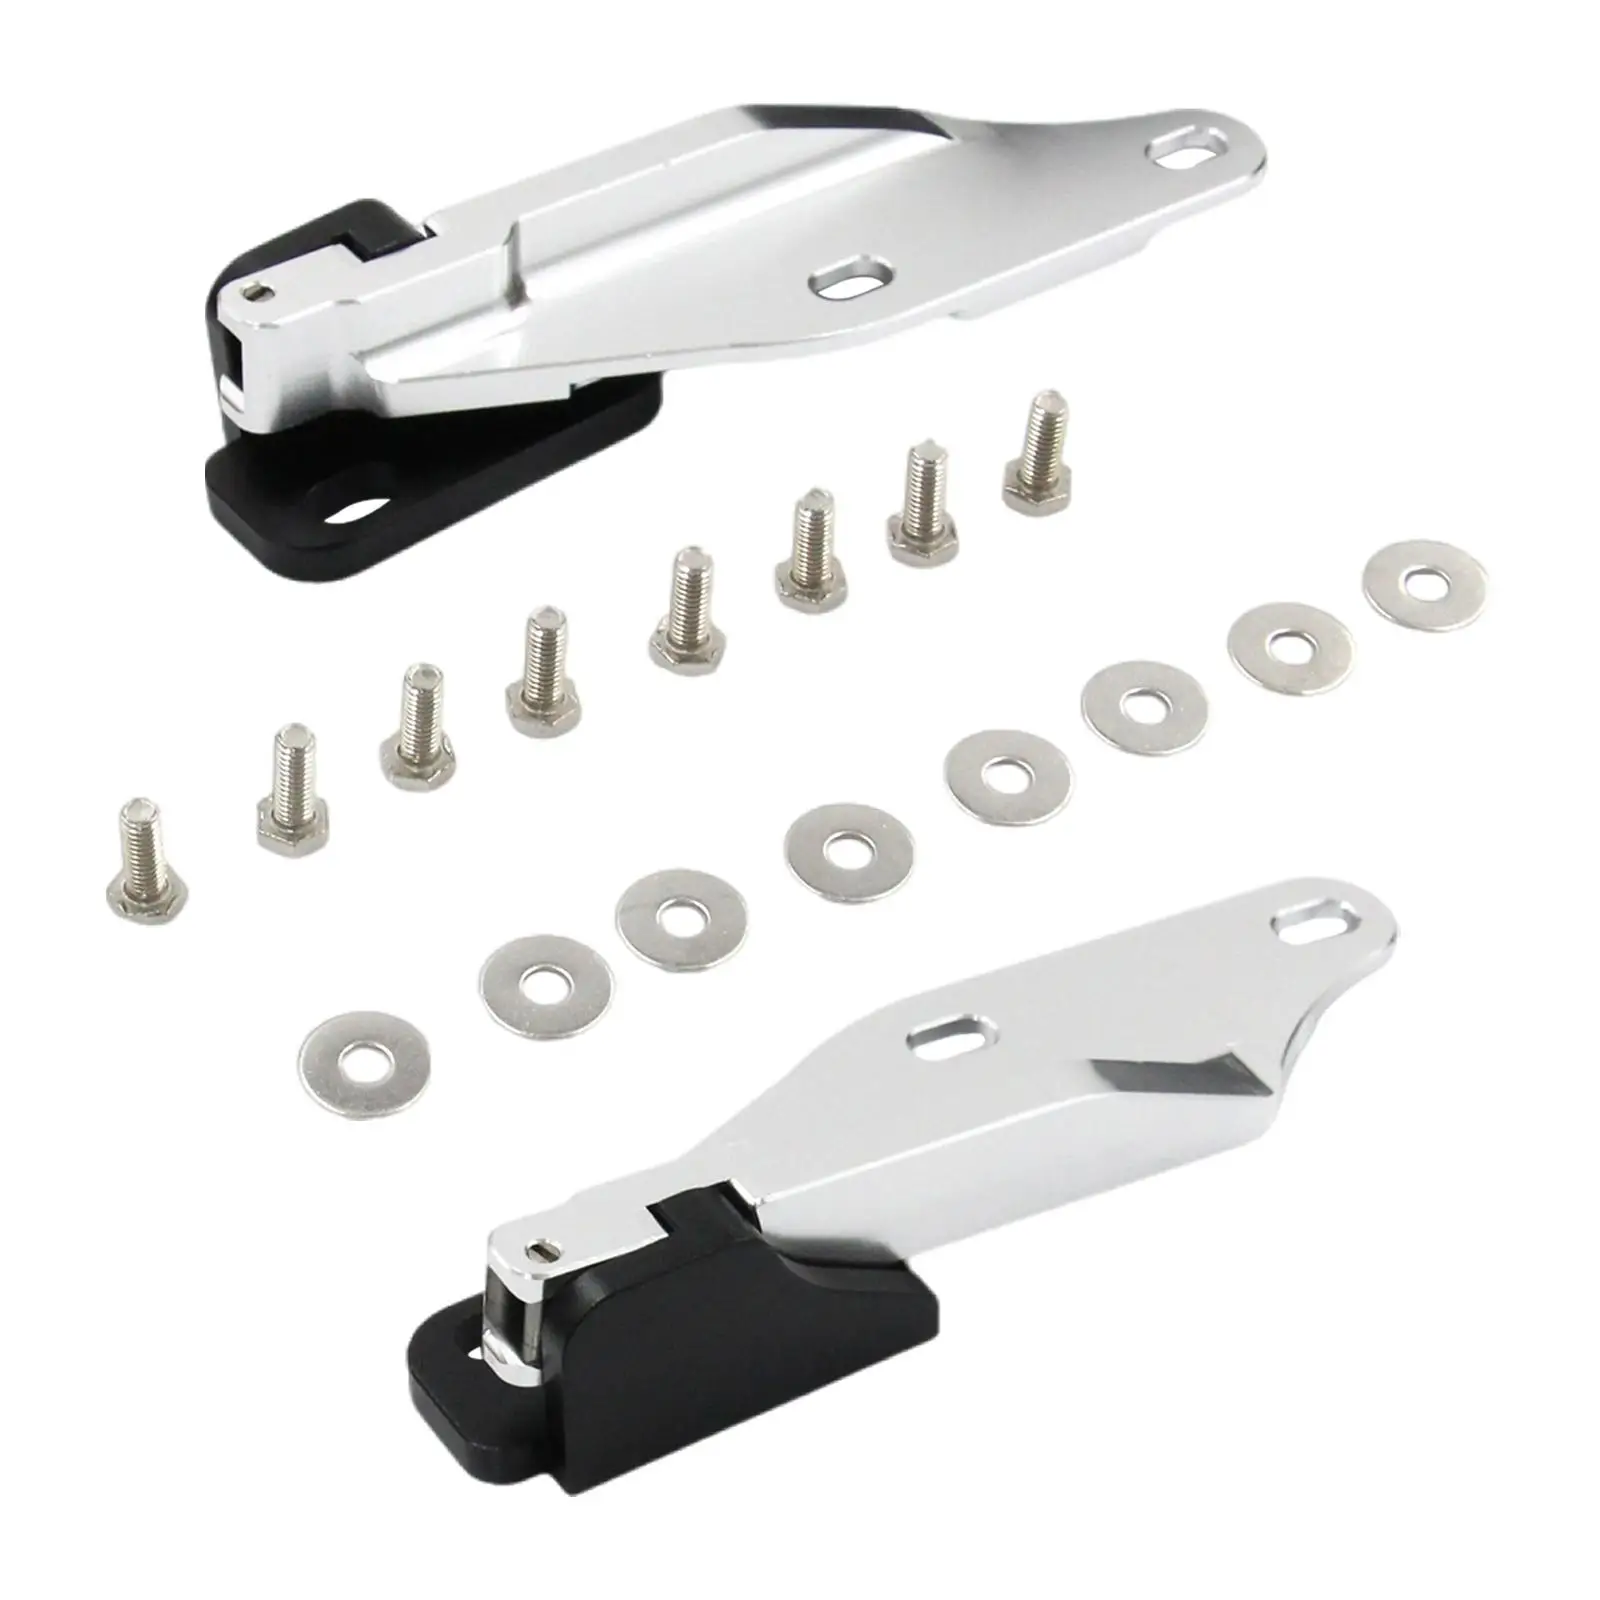 2 Pieces Quick Release Hood Hinge Bonnet Latch Automotive High Strength Easy Installation Accessory for Honda CRV RD Repair